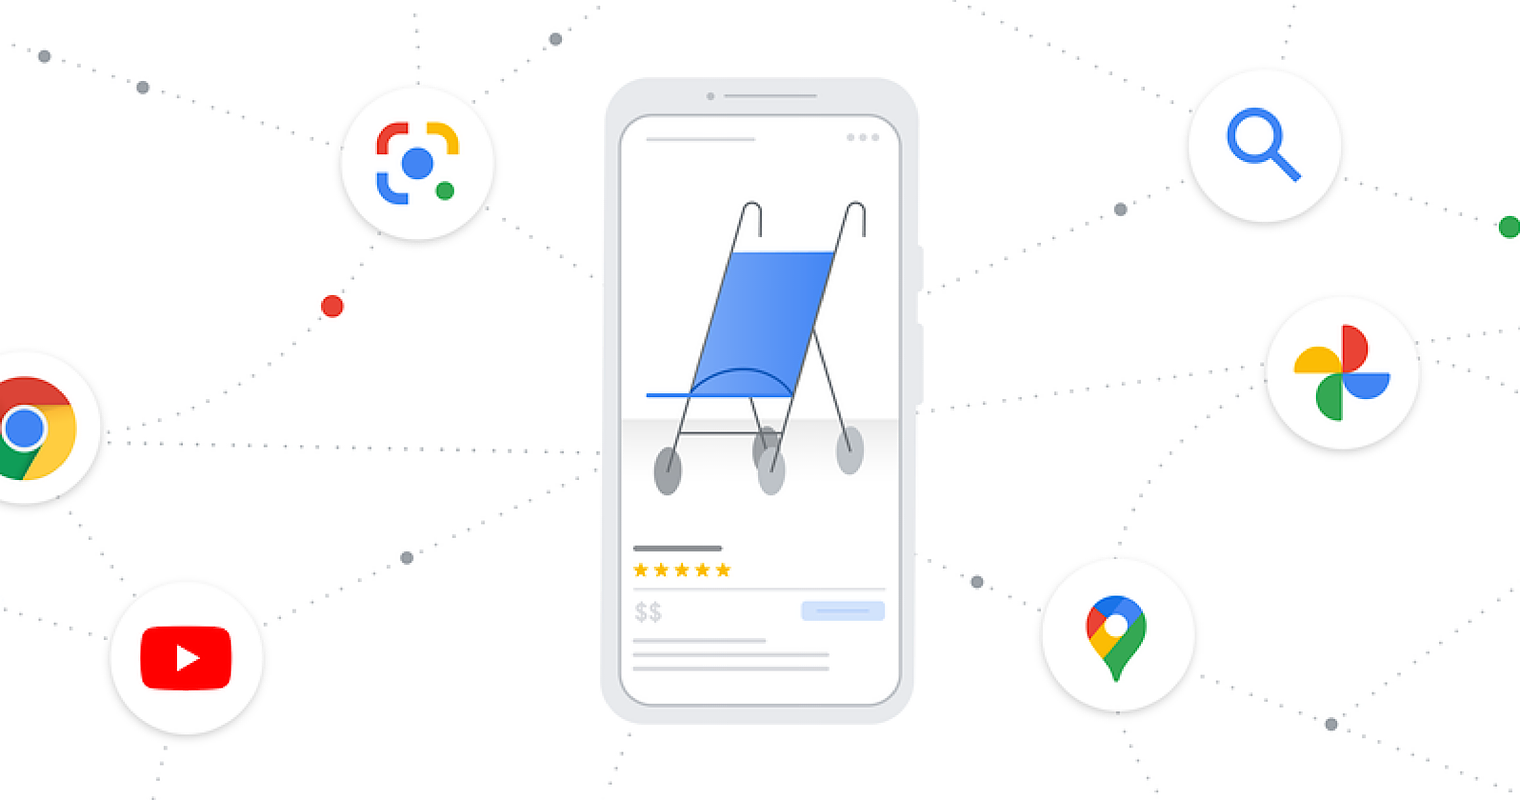 Google Grows Shopify Partnership, Adds Ways to Shop From Images